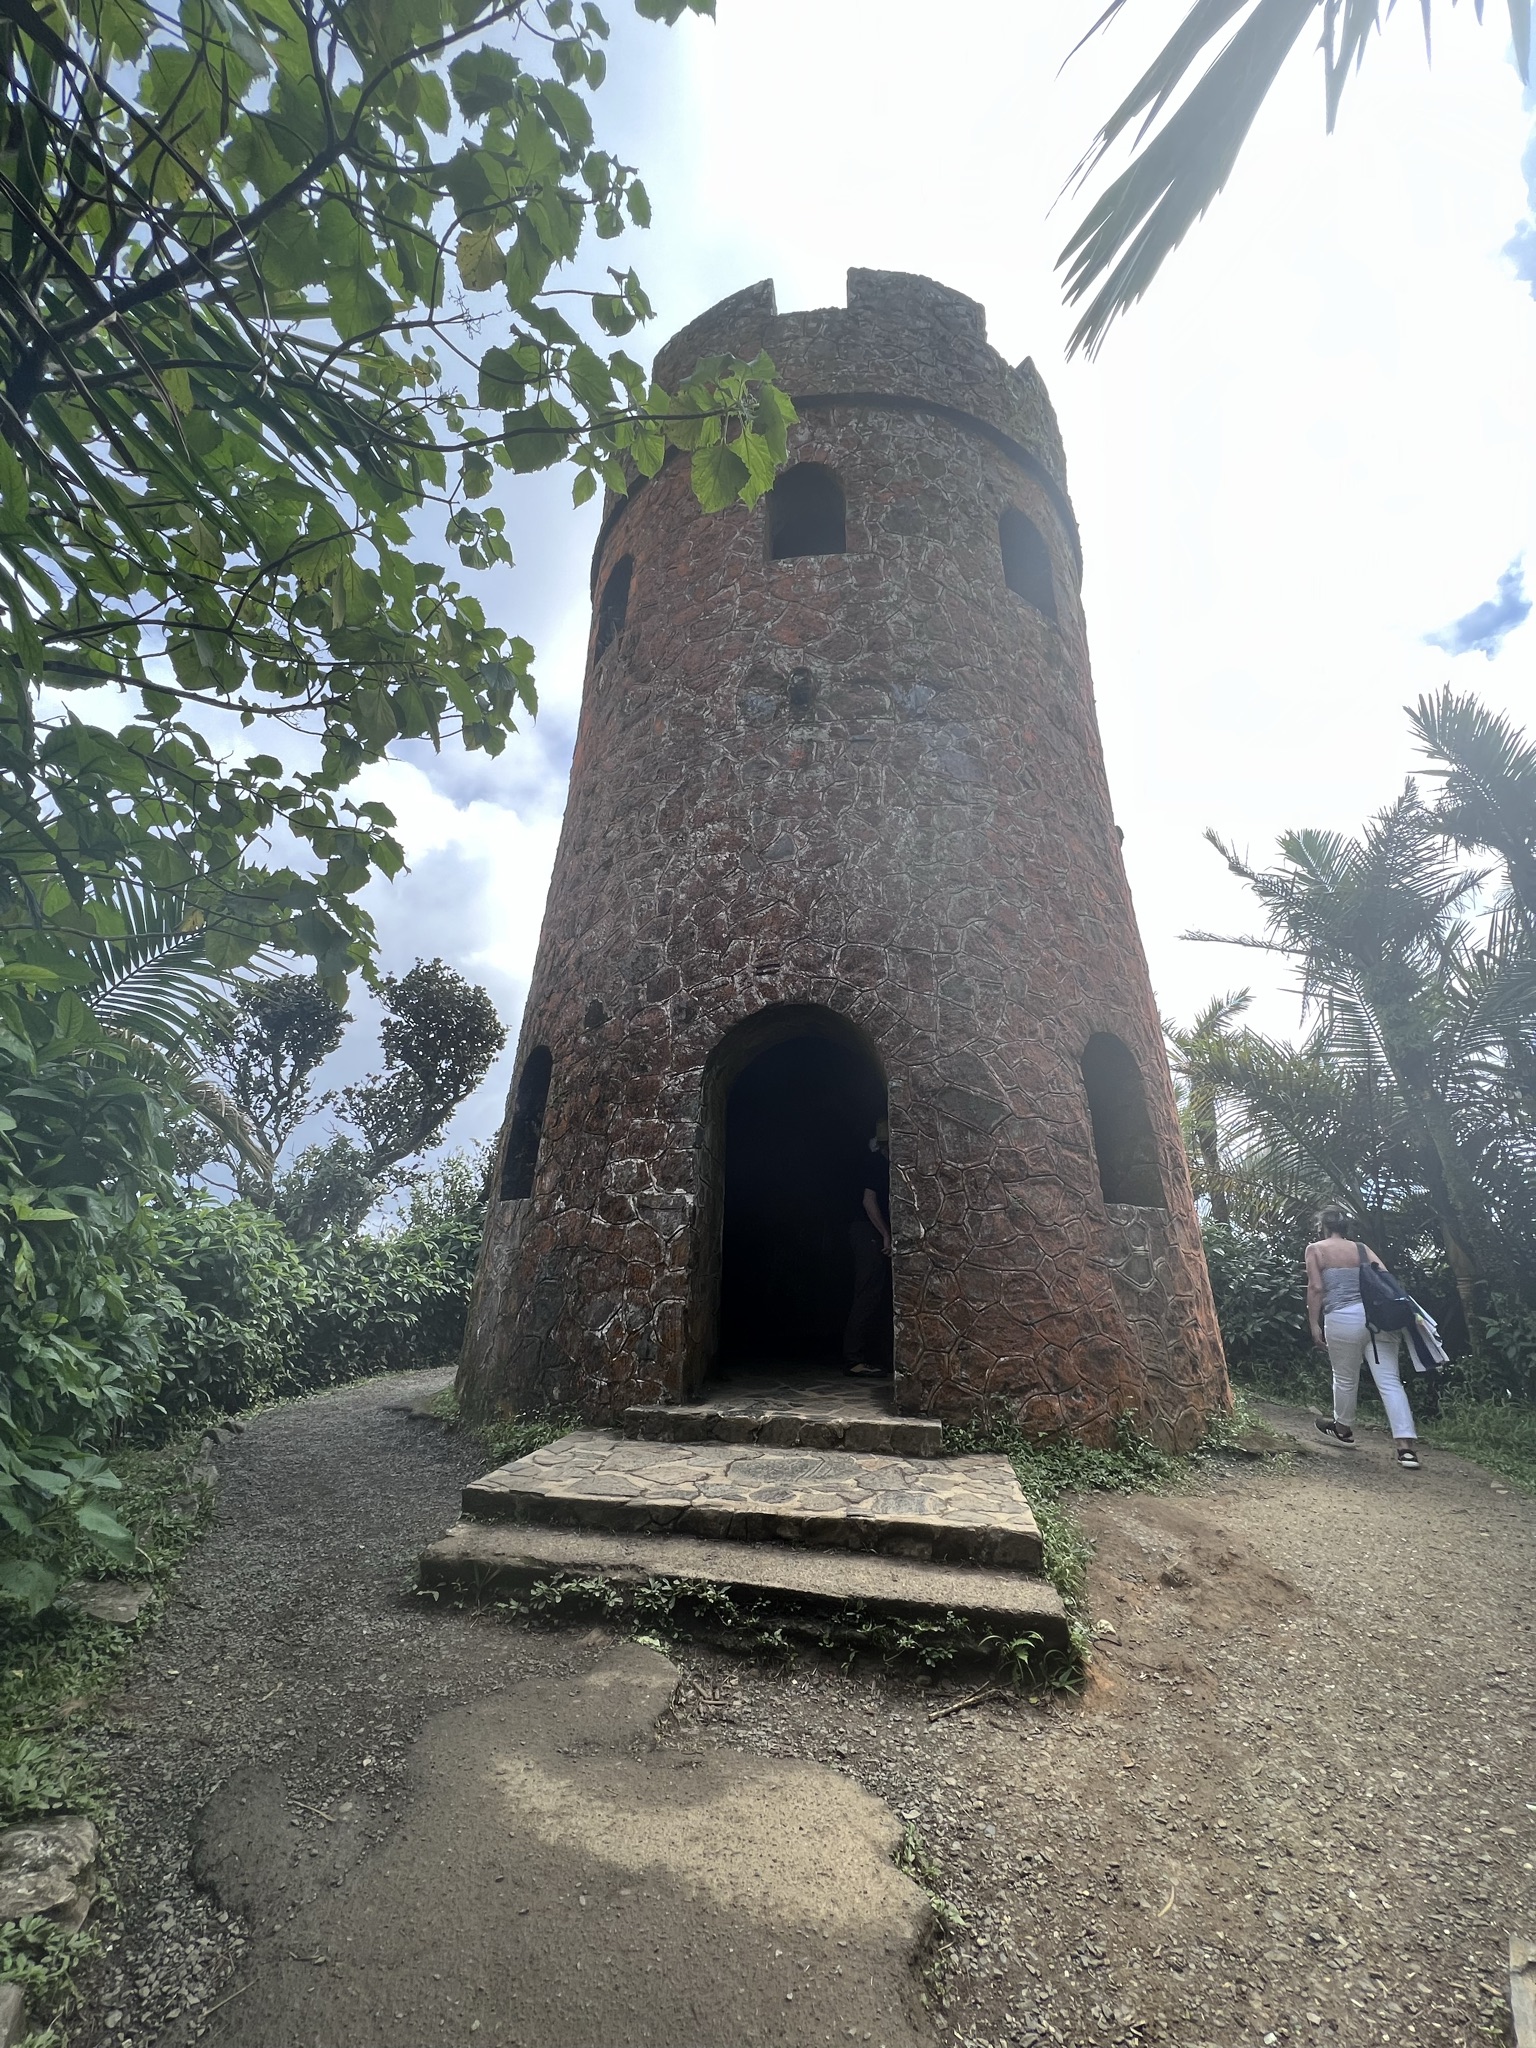 mt britton tower in el yunque national forest